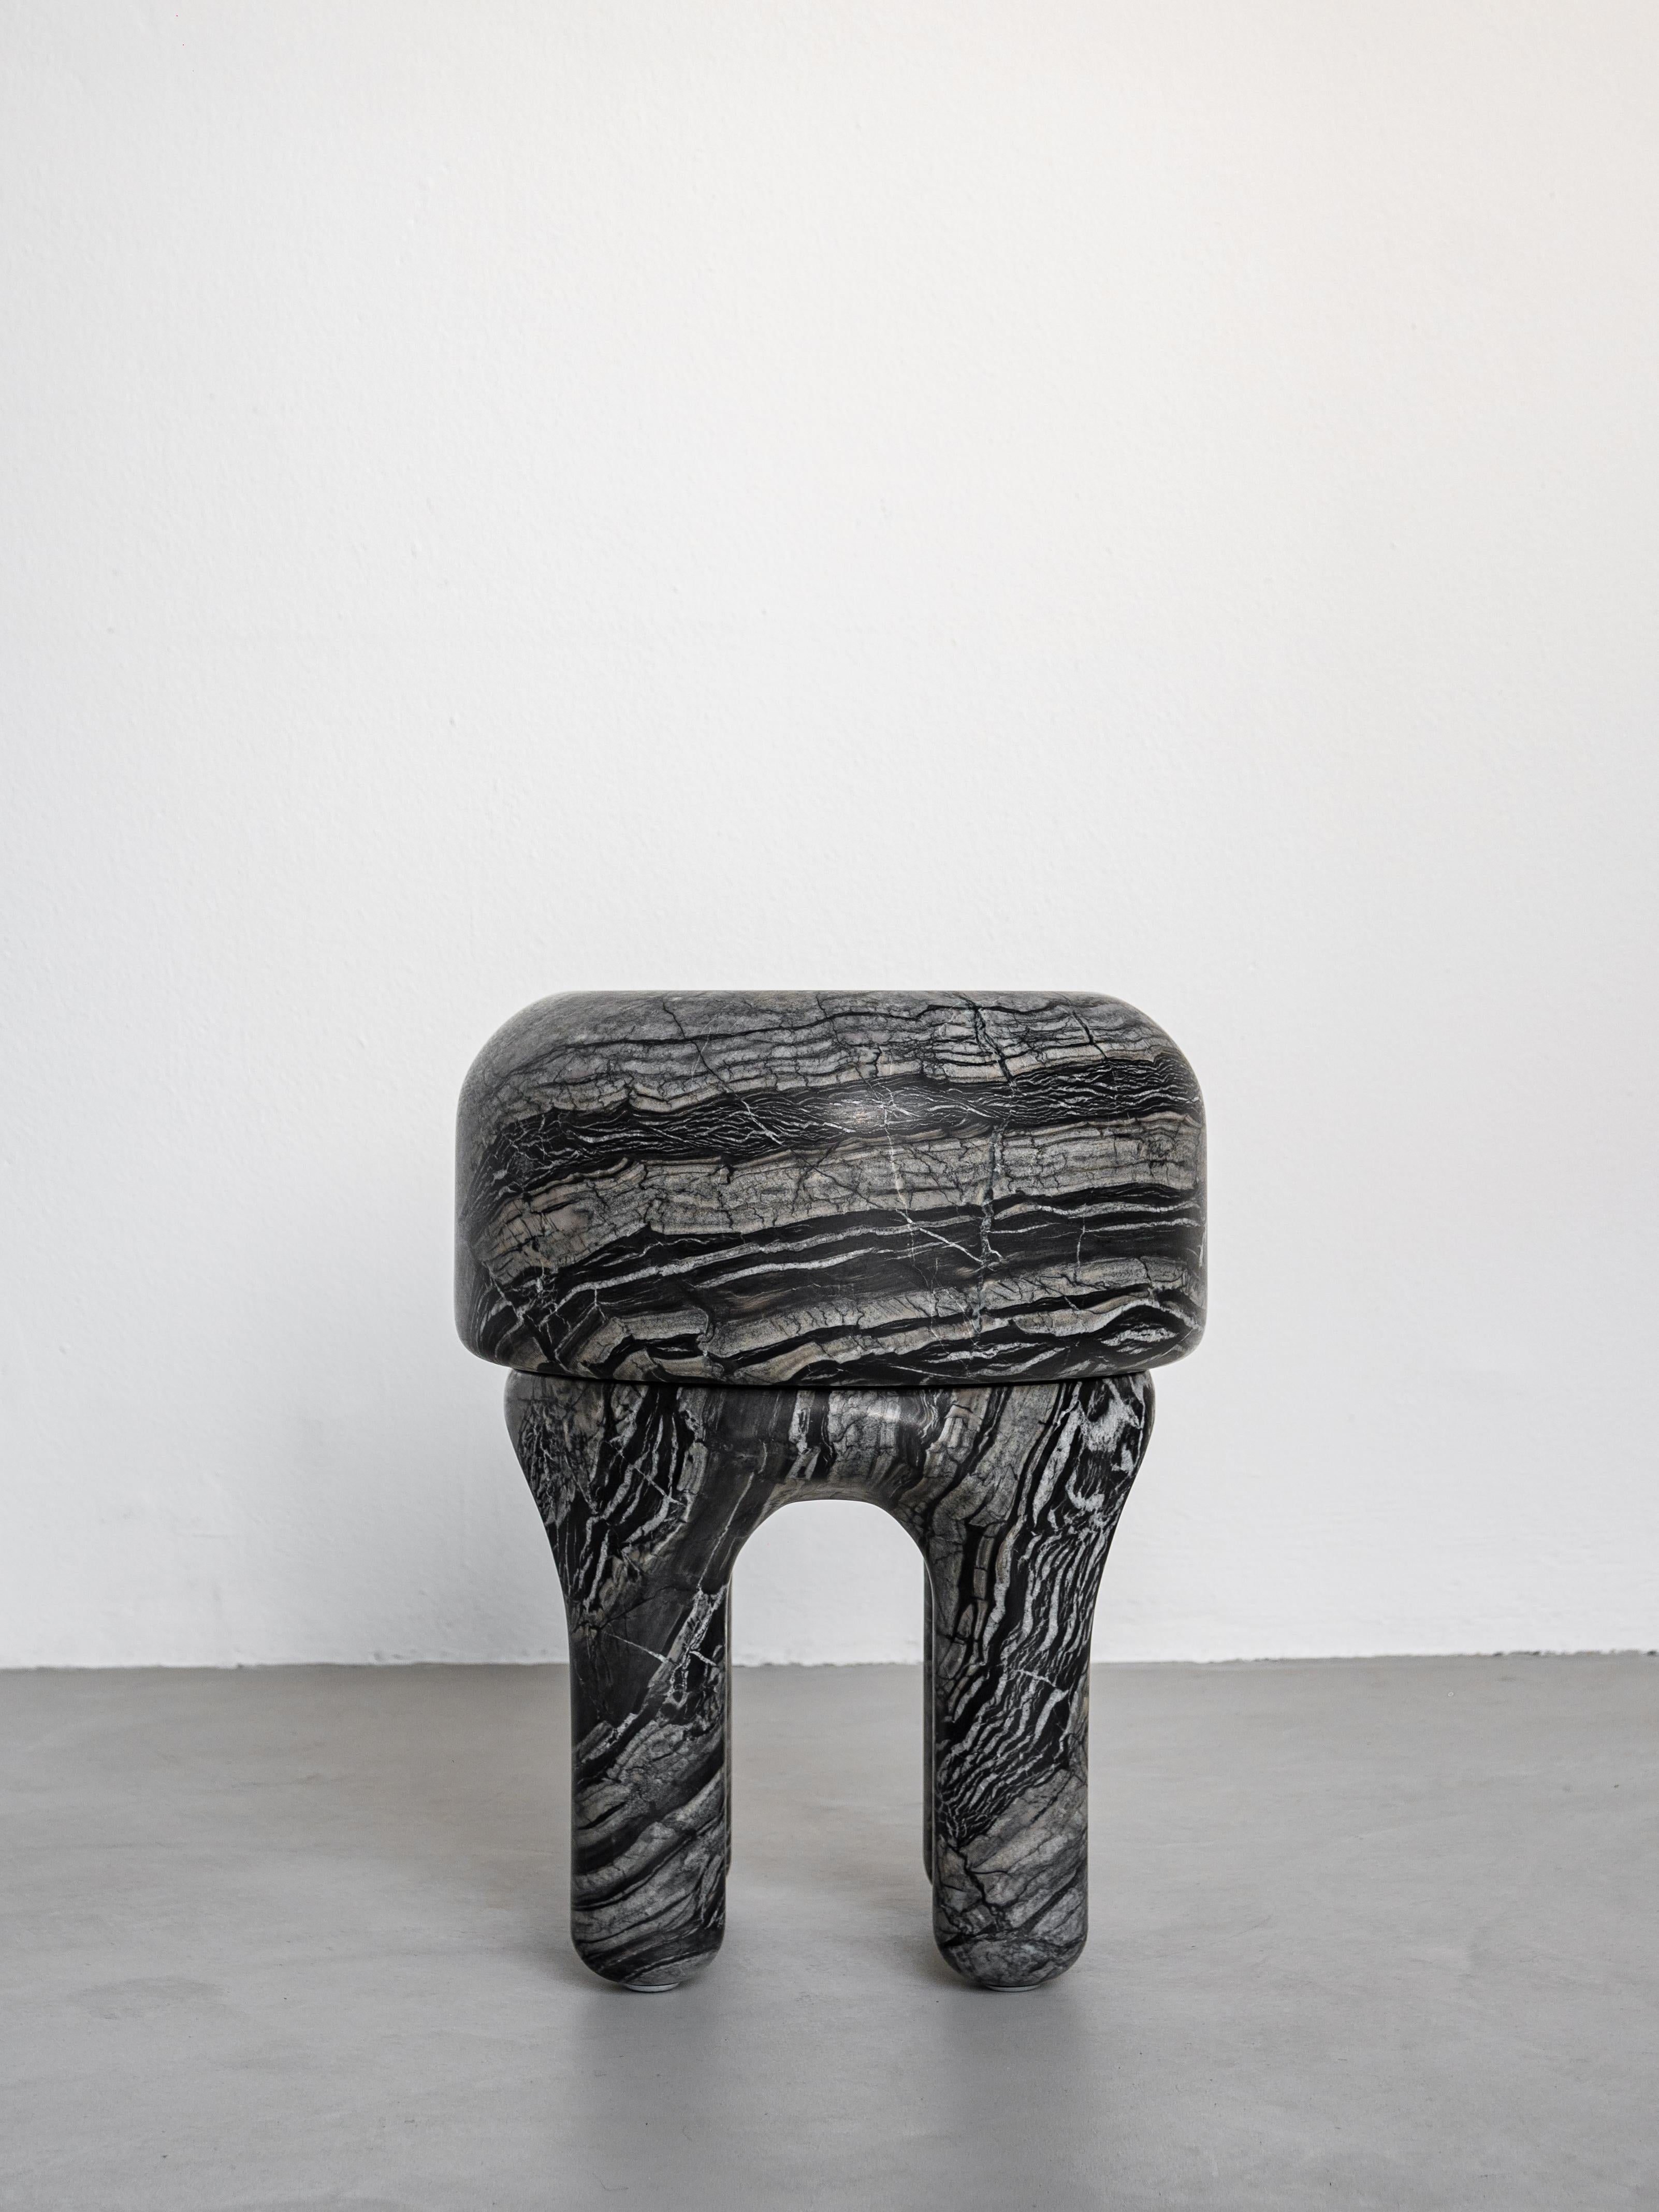 Marble Sculpture - Collectible side table - Sculptural Stool - Italian Design

Past, present and future come together in this sculptural piece by Spinzi. Why you may ask? Because Medusa is shaped after a dream had by designer Tommaso Spinzi right